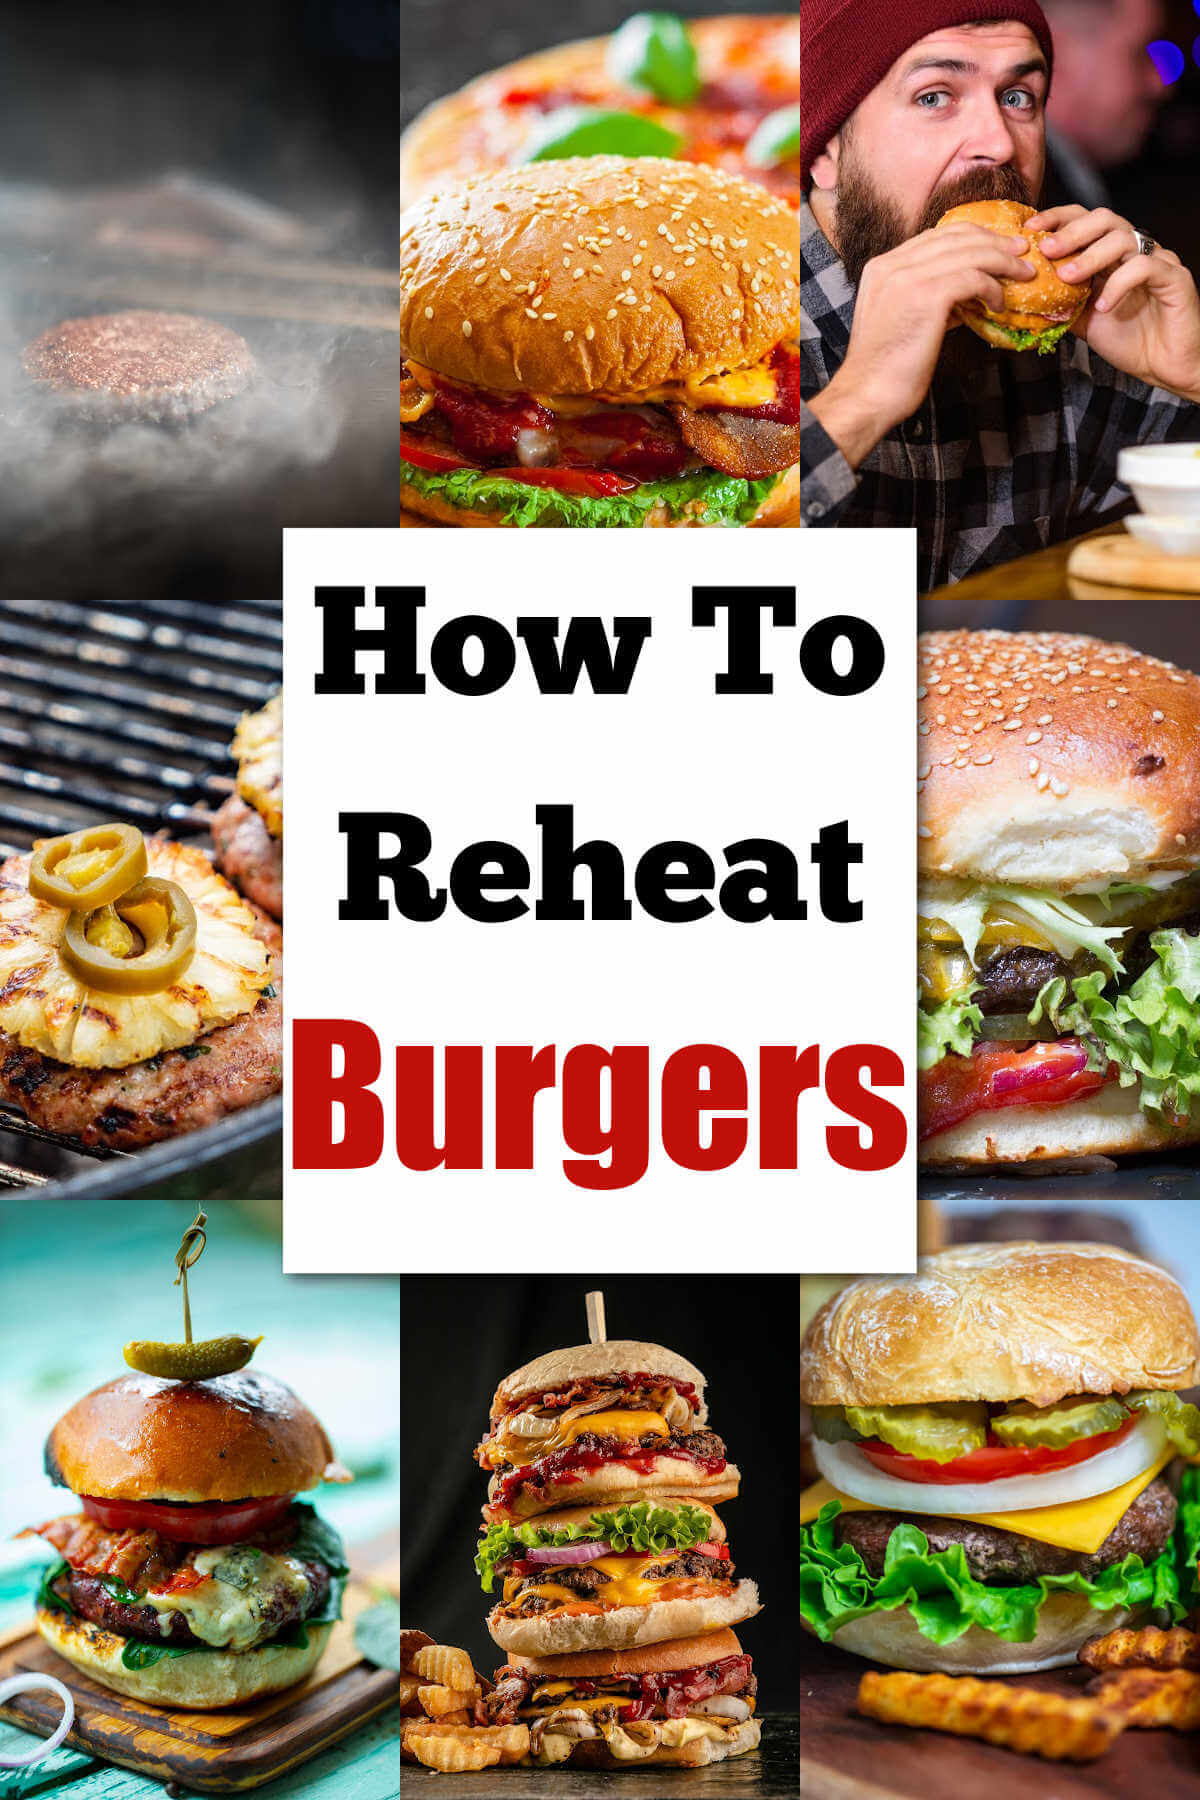 How to Reheat a Burger